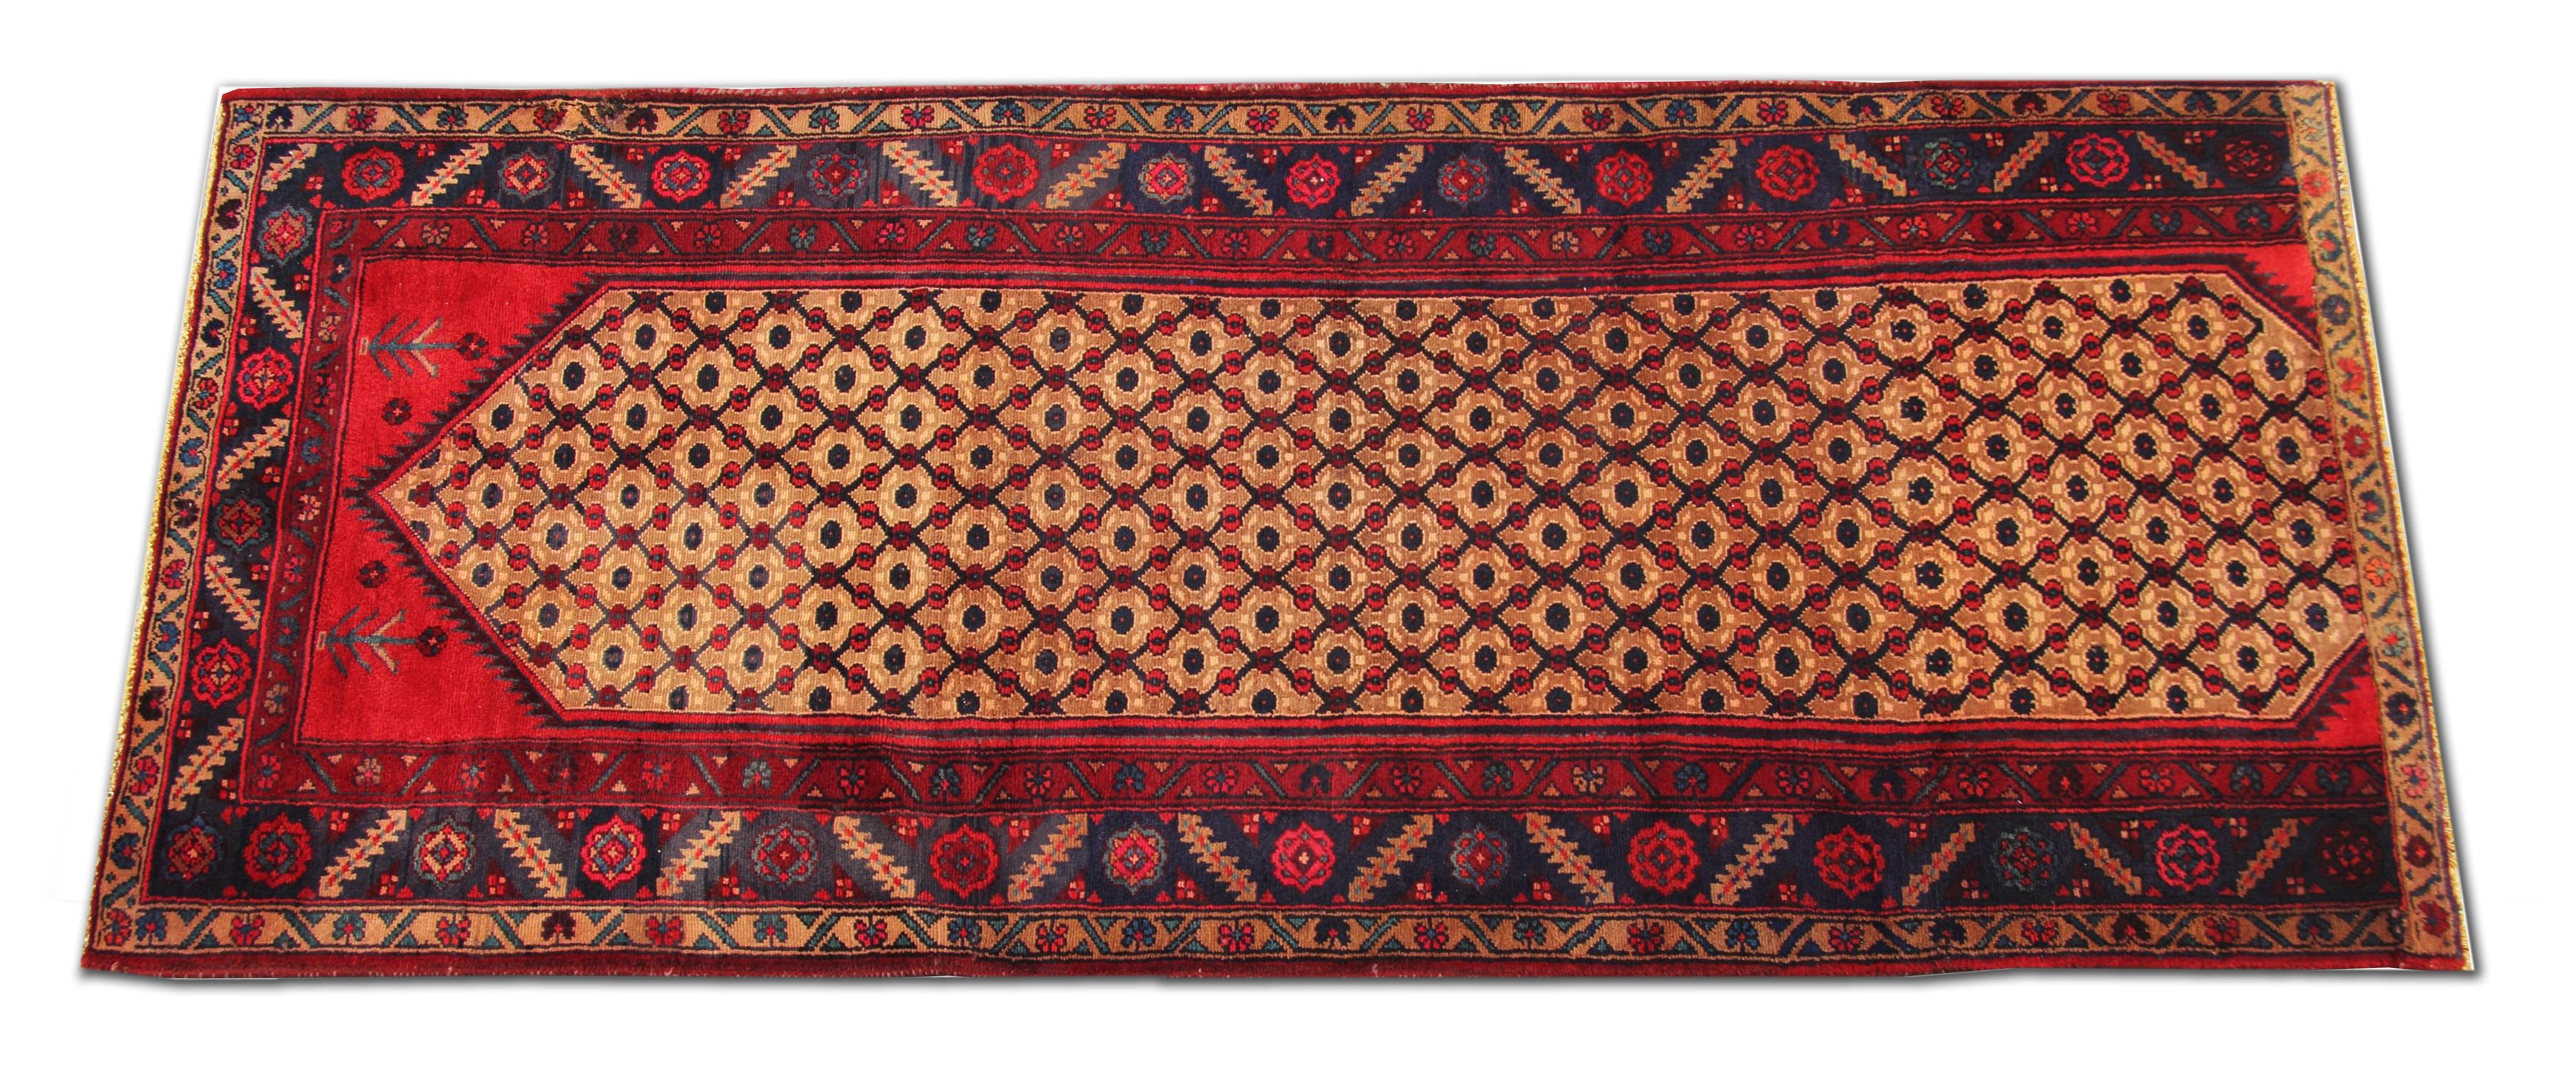 This fine wool Runner rug is a great example of carpets woven by hand in the late 20th century. It features a bold design and colour palette, including red, blue and beige. The design and colour palette complement each other creating a beautiful